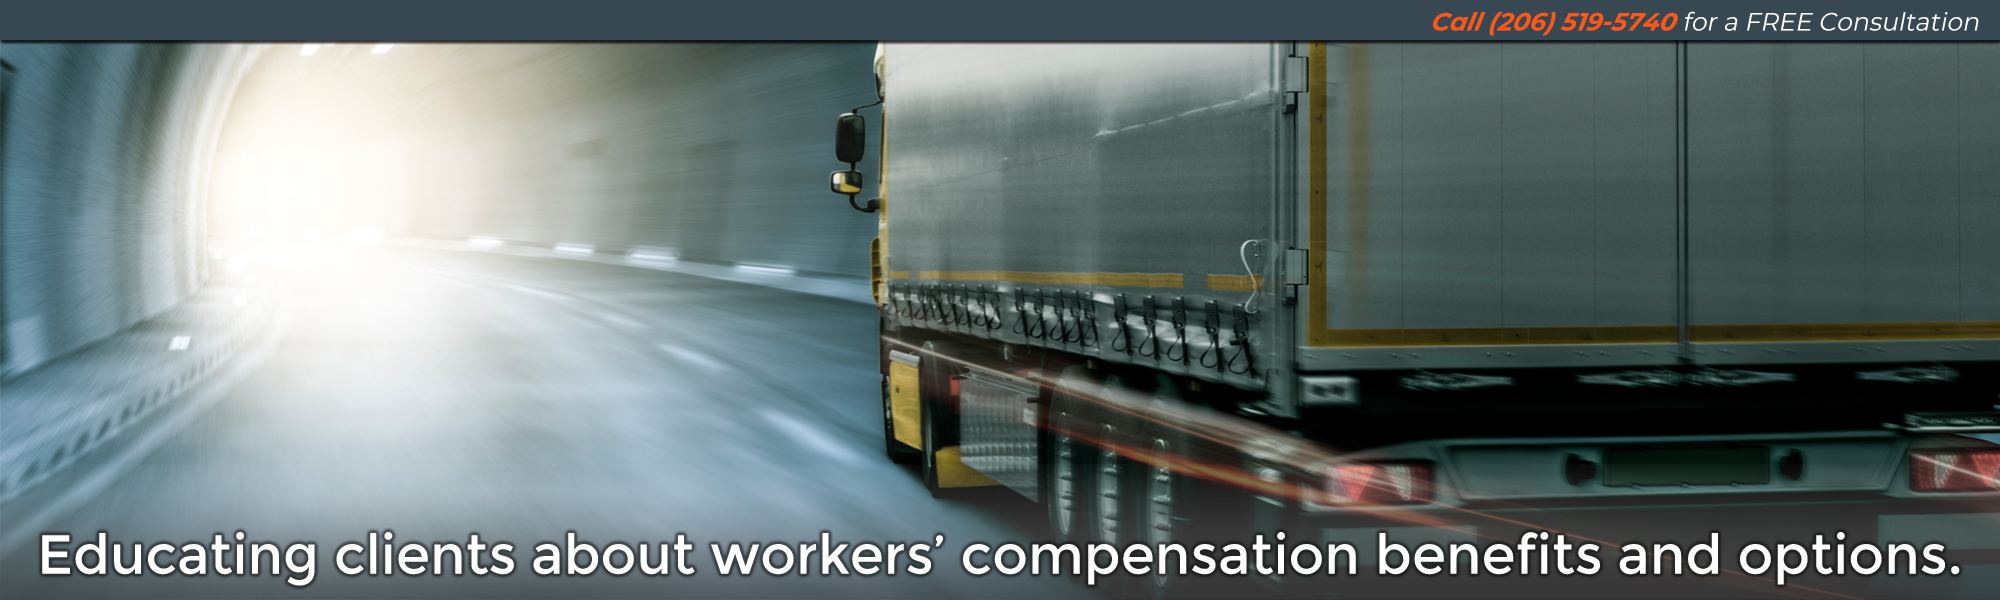 Educating Clients Worker's Compensation Benefits